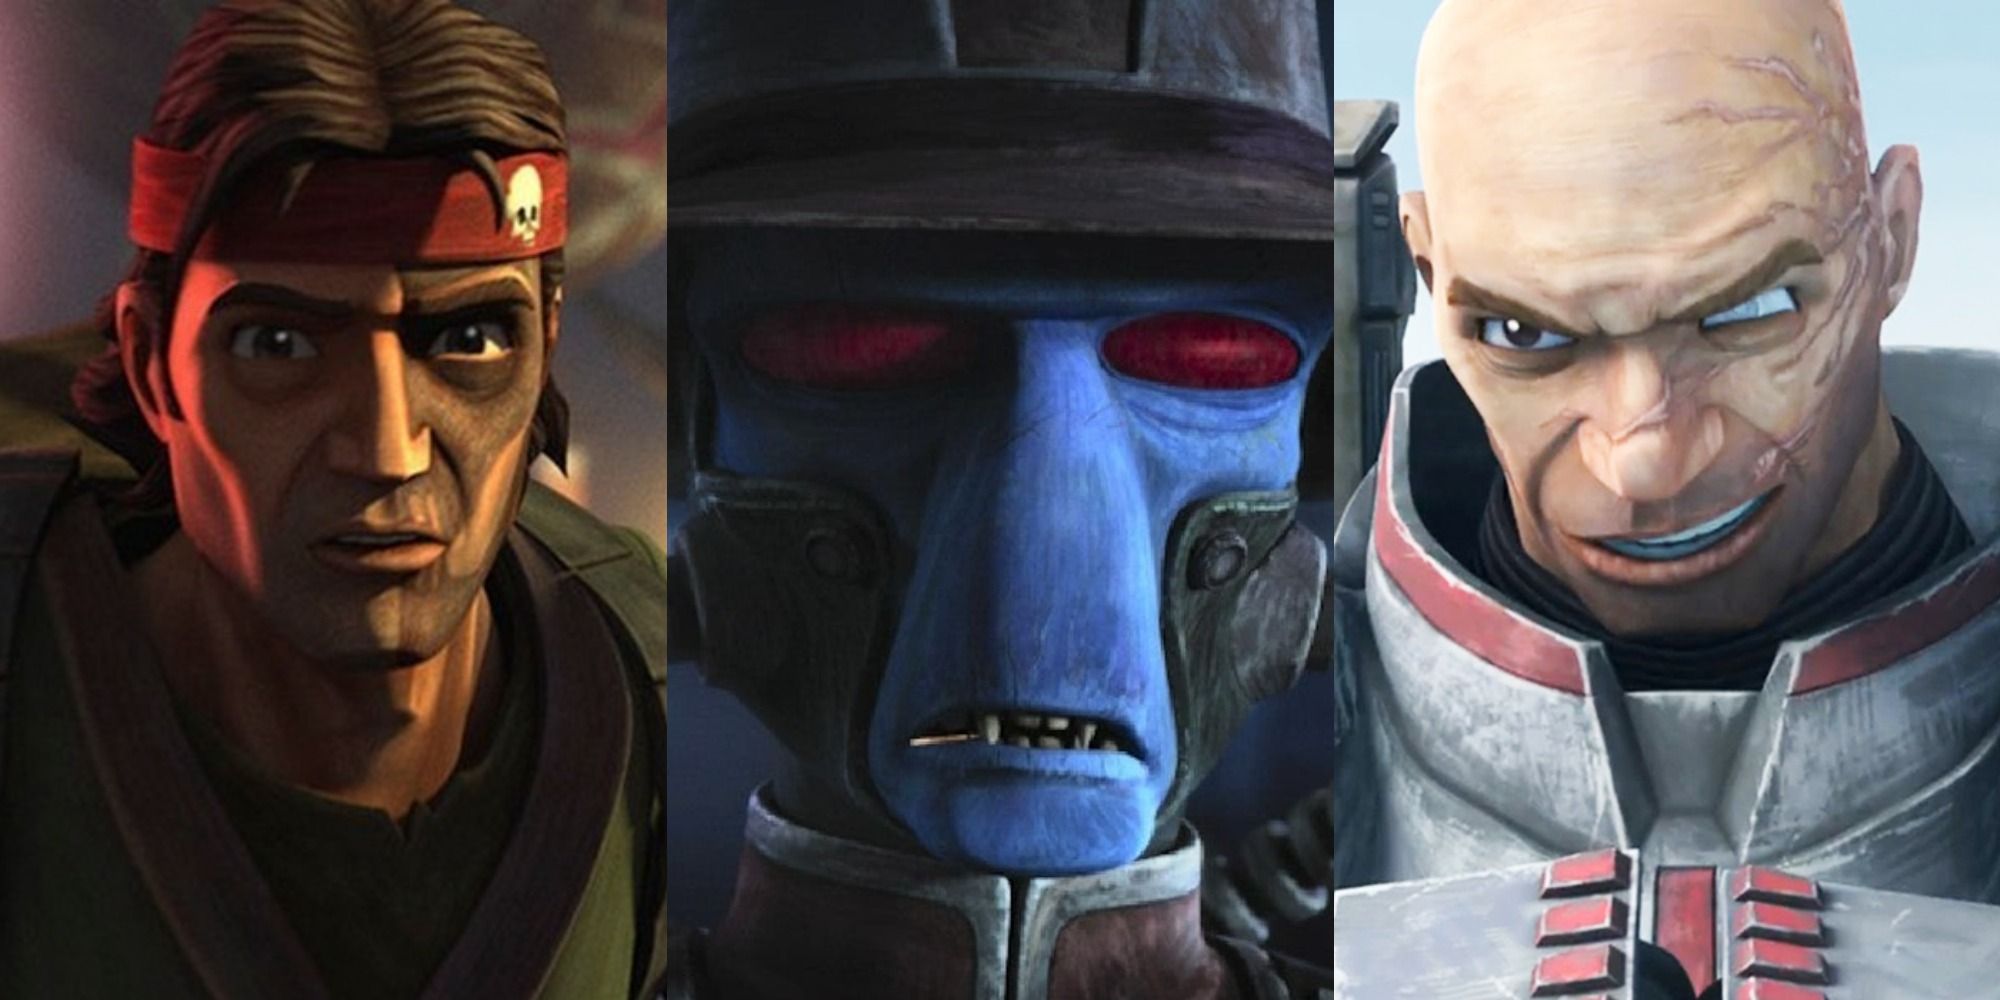 A split image of Hunter, Cad Bane and Wrecker from The Bad Batch